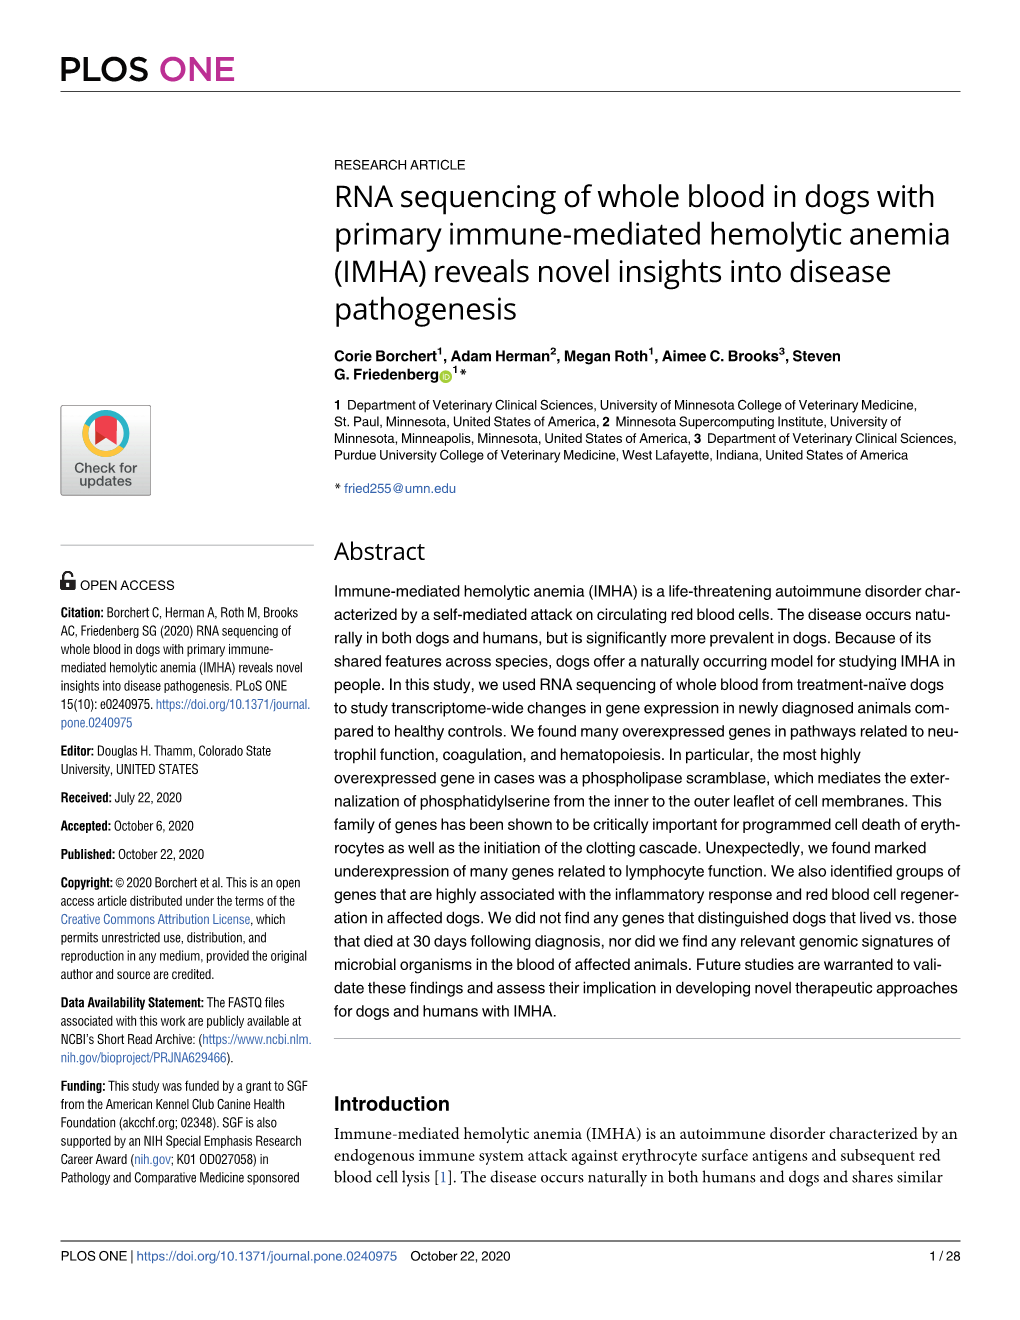 RNA Sequencing of Whole Blood in Dogs with Primary Immune-Mediated Hemolytic Anemia (IMHA) Reveals Novel Insights Into Disease Pathogenesis